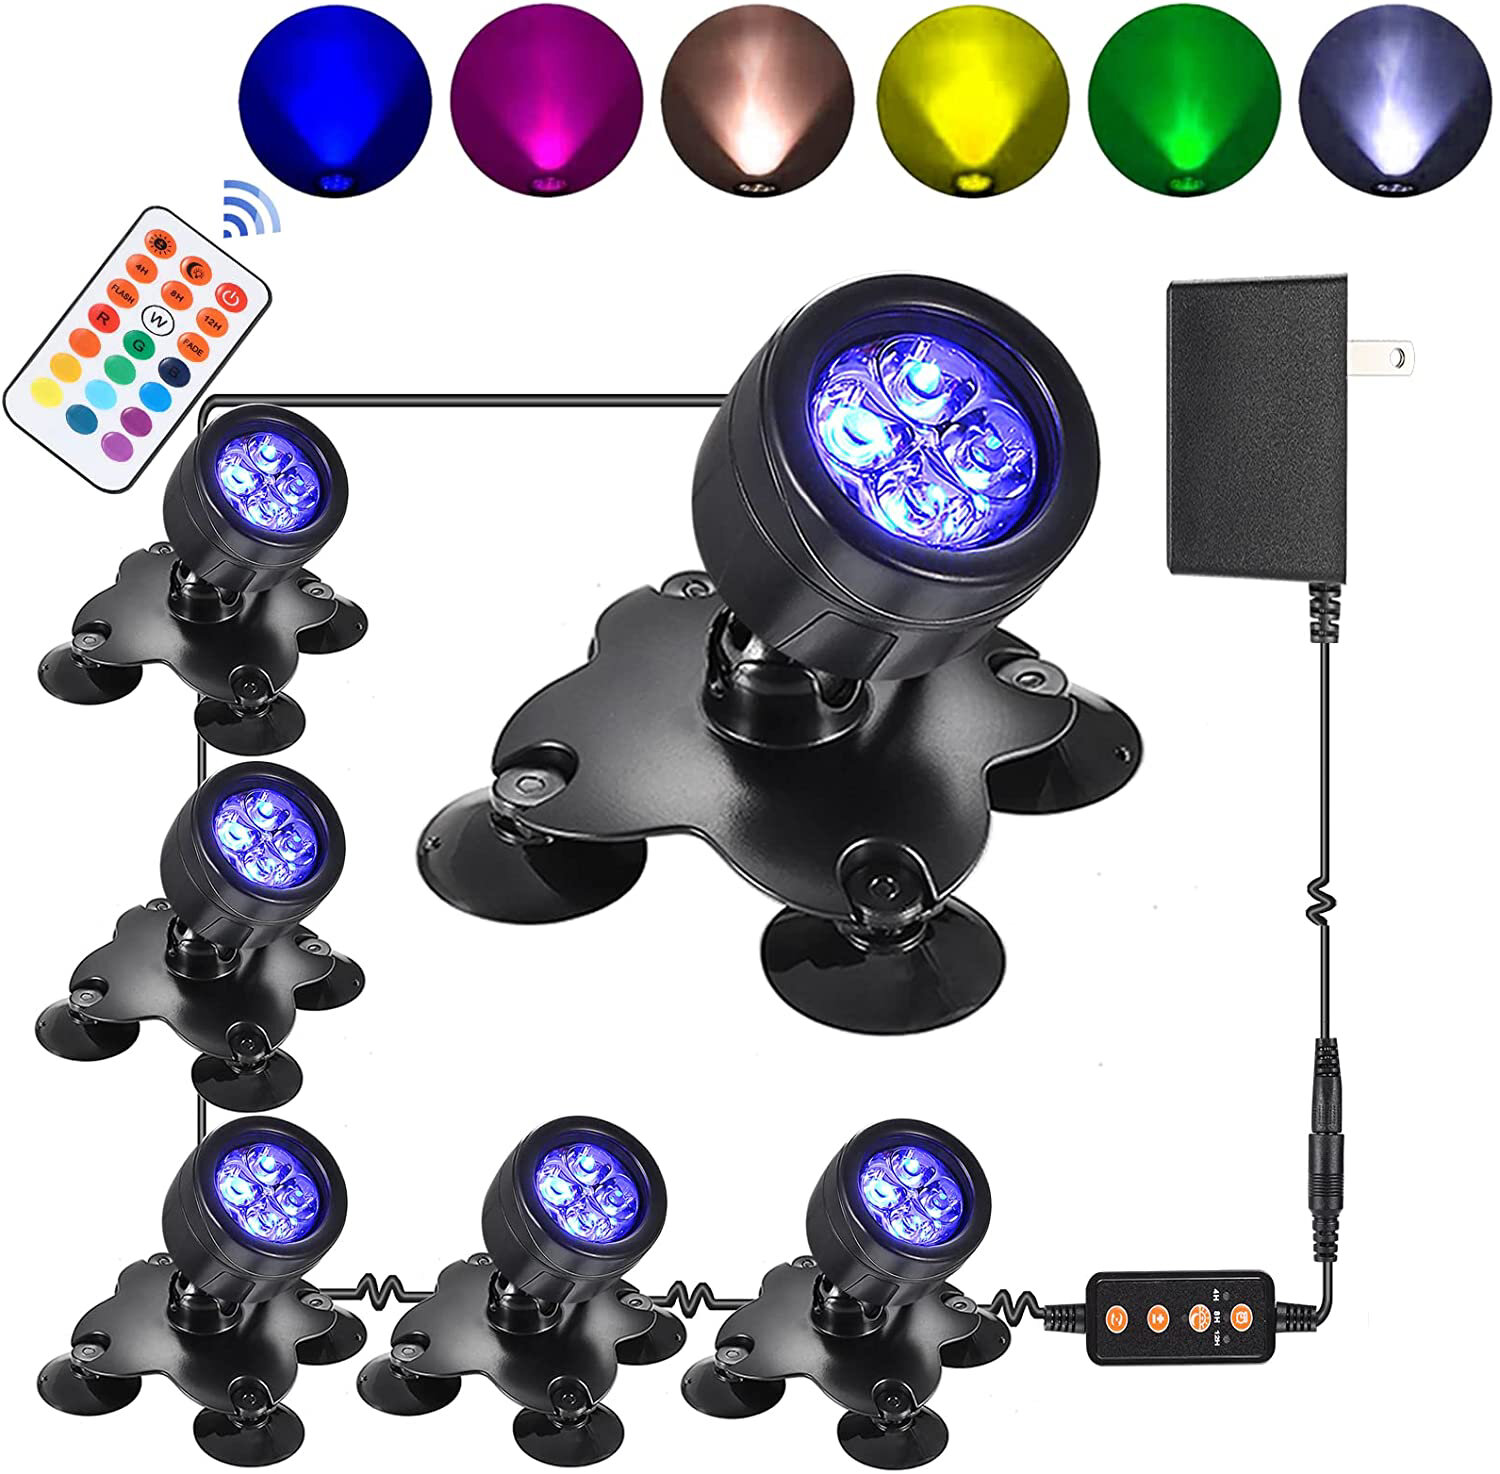 

LED Pond Lights Led Underwater Fountain Submersible, Outdoor Indoor IP68 Waterproof Landscape Spotlights, 4 Bright LED w